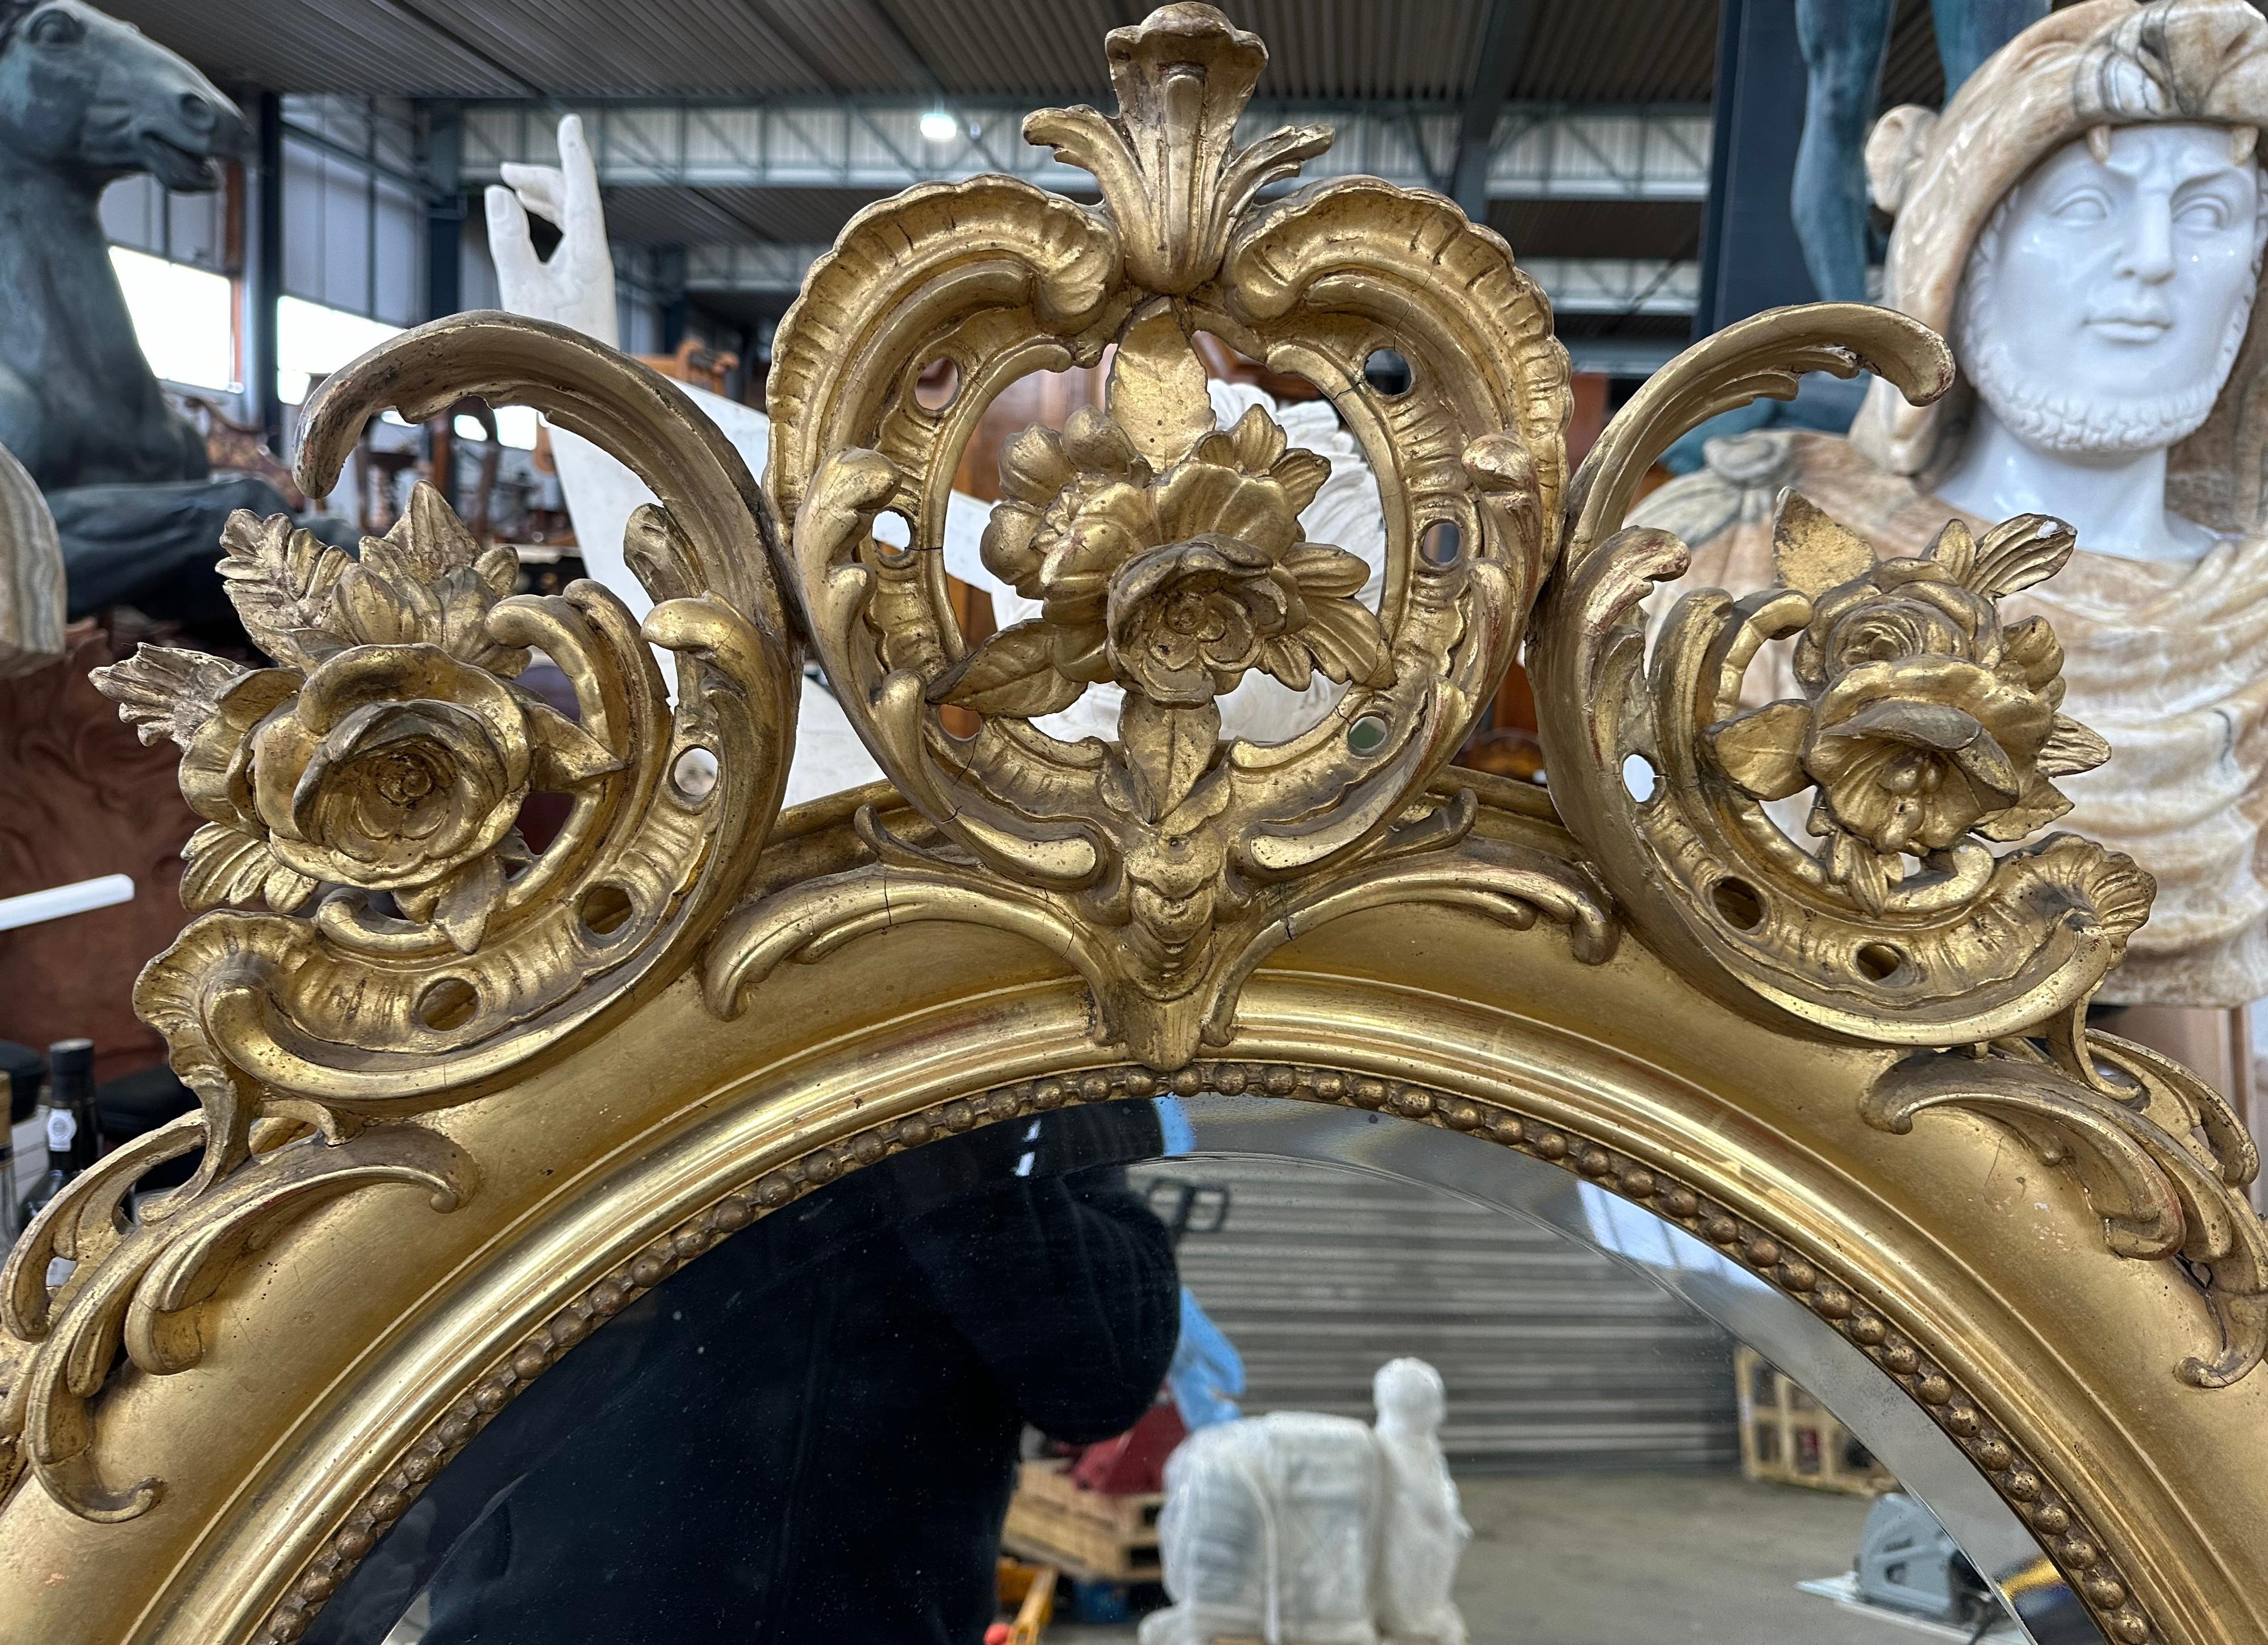 Decorative French giltwood mirror with floral carvings and elaborate cresting with three plumes at the top formed from scrolls and foliage. The oval glass is bevelled with gilt beading. A very attractive mirror that imbues a sense of grandeur.